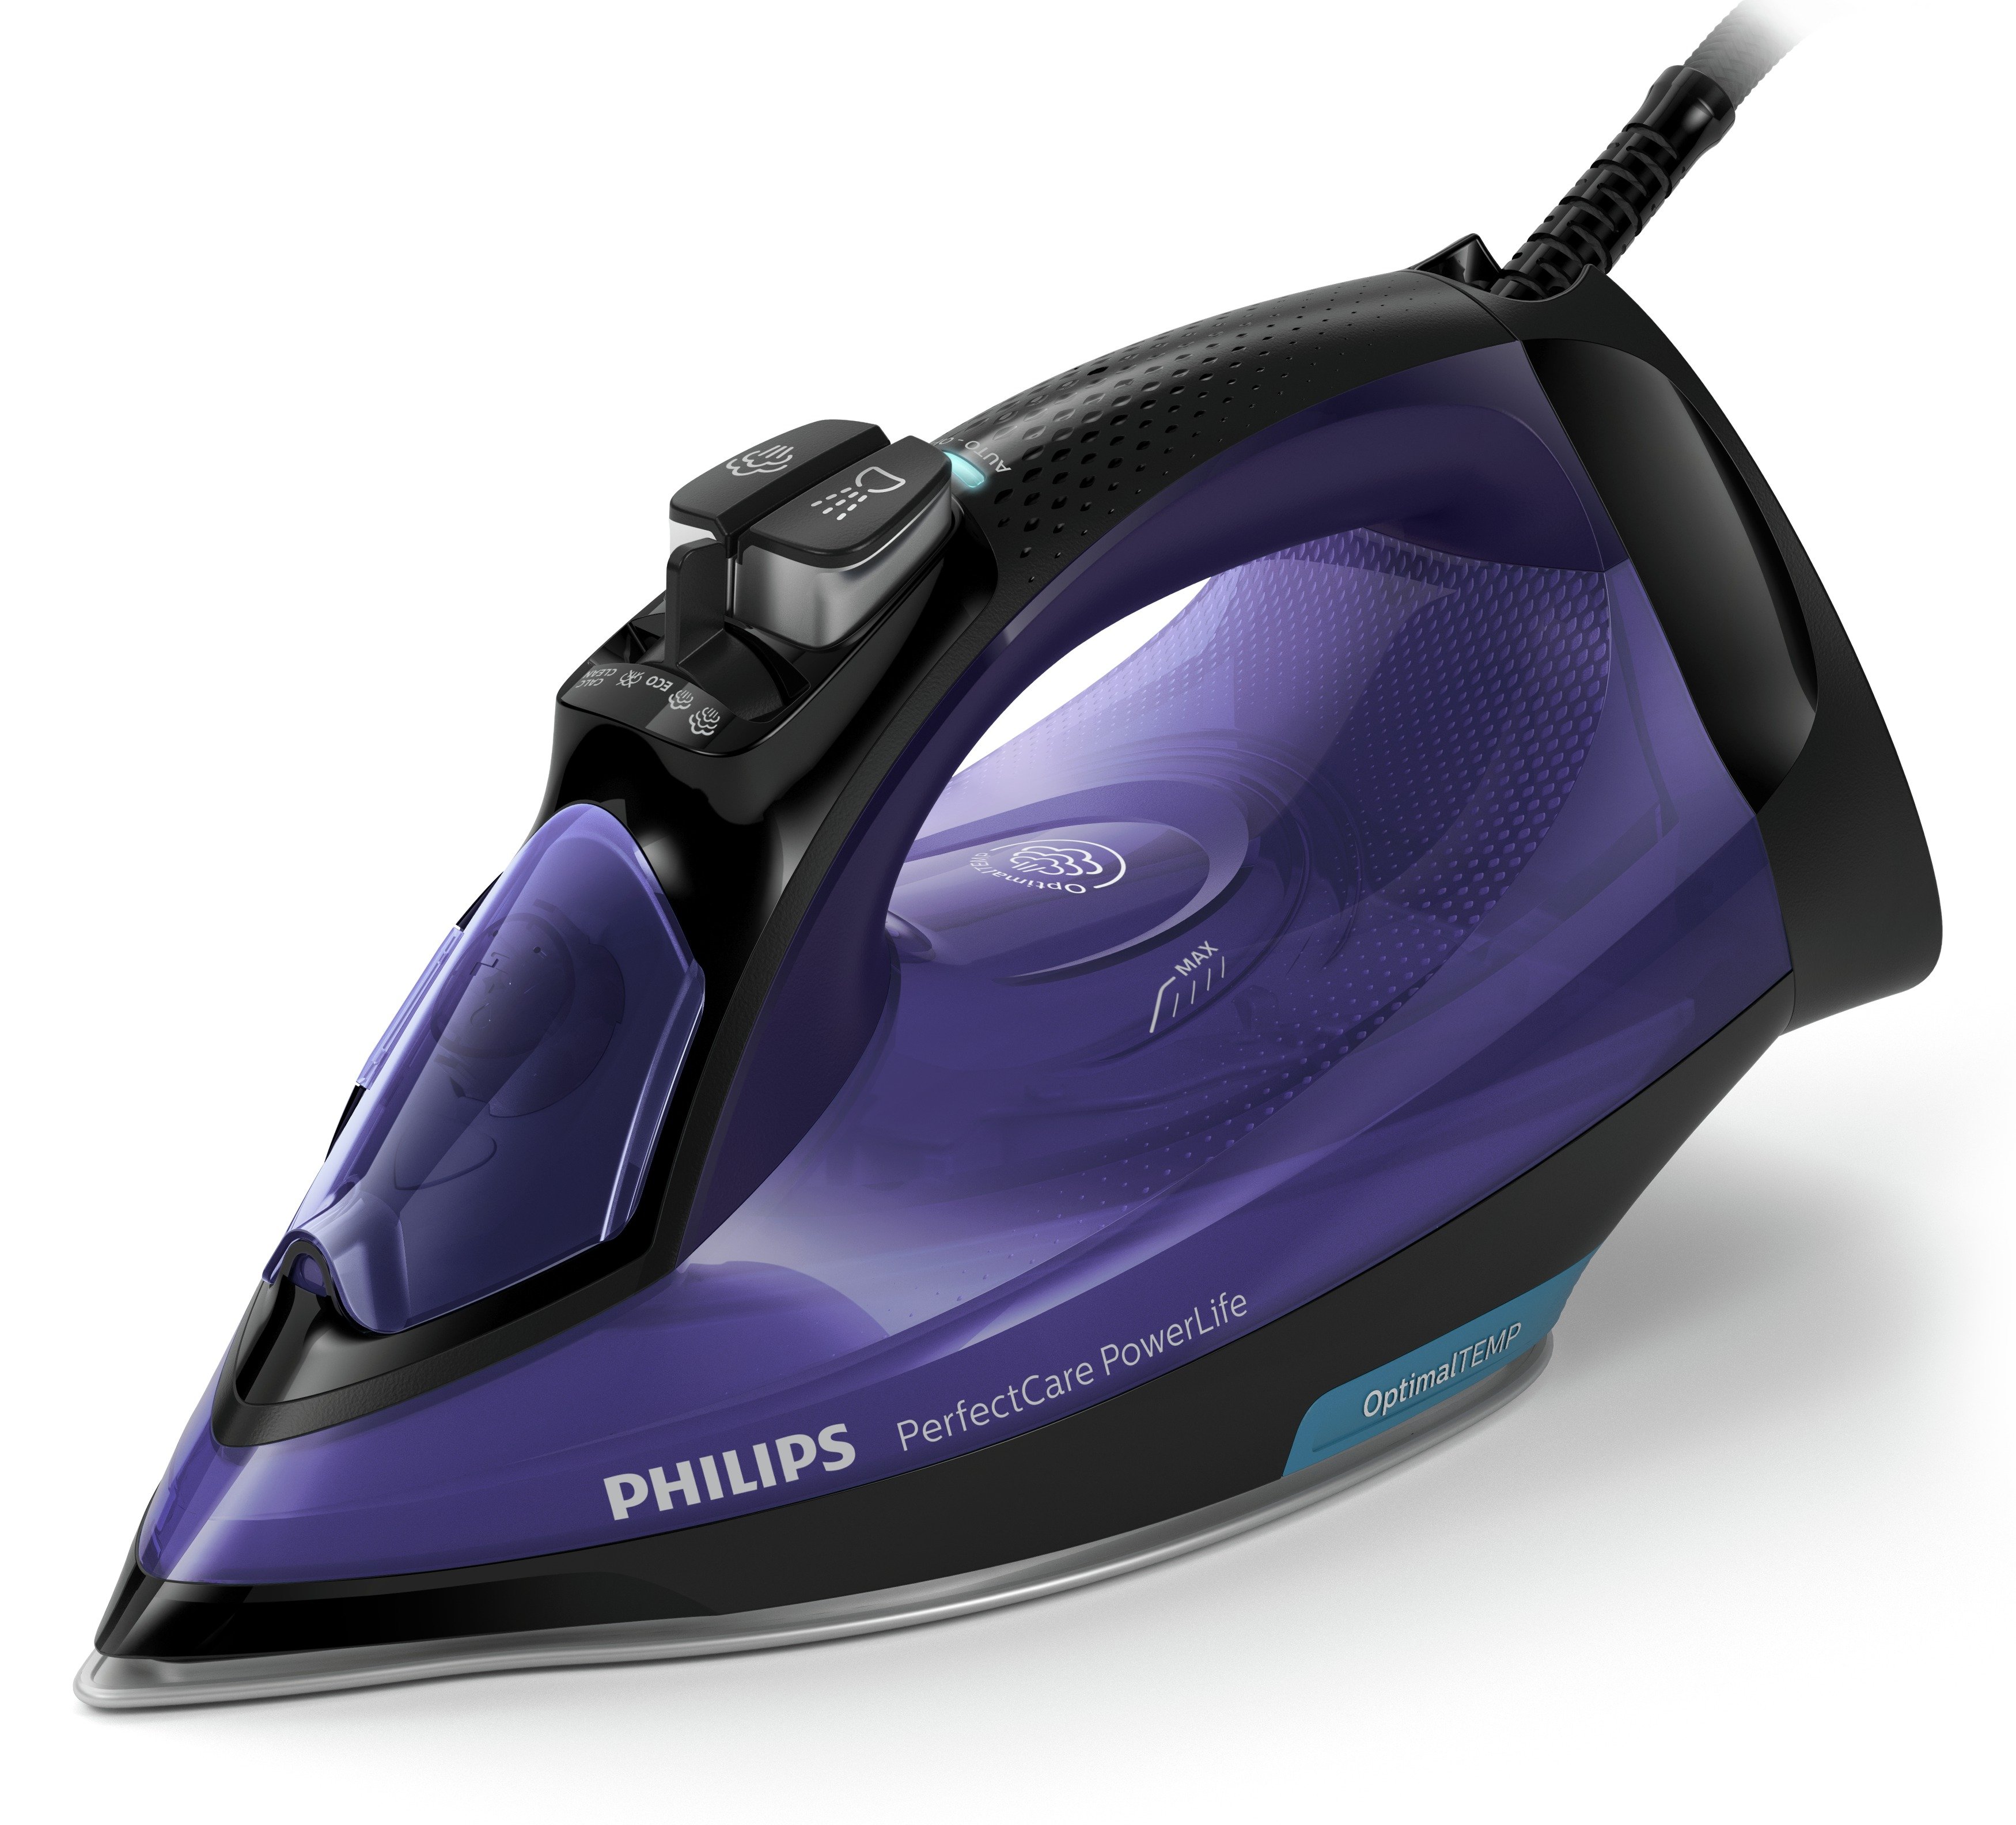 Philips Perfectcare Powerlife GC3925 Steam Iron Review